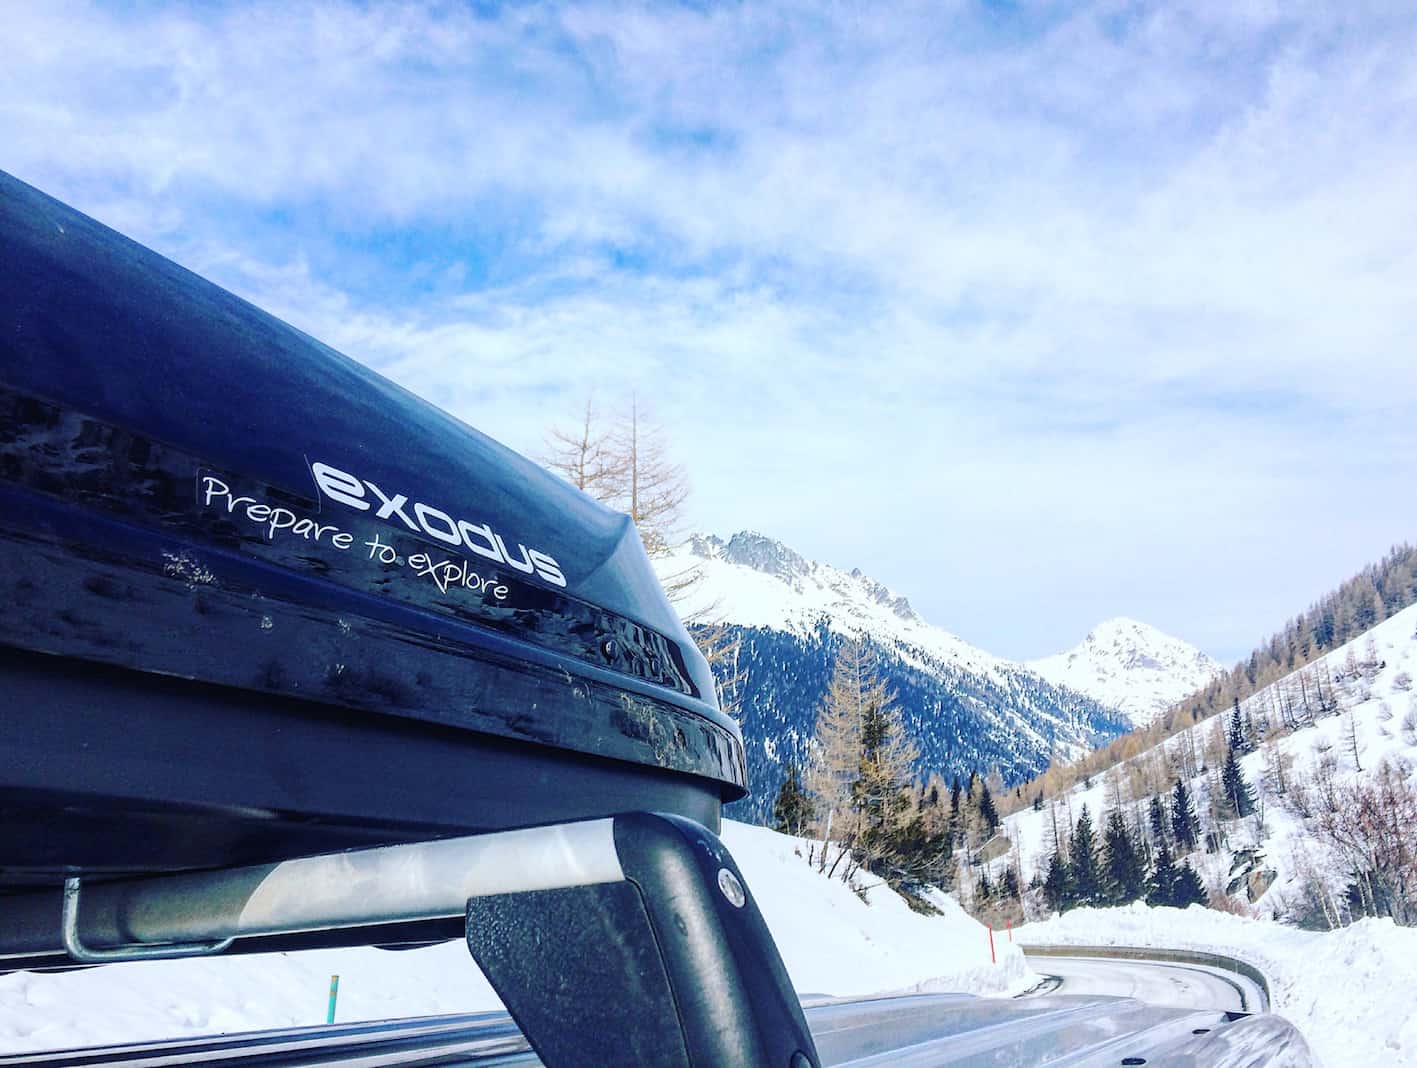 Exodus roof box in a mountain scene